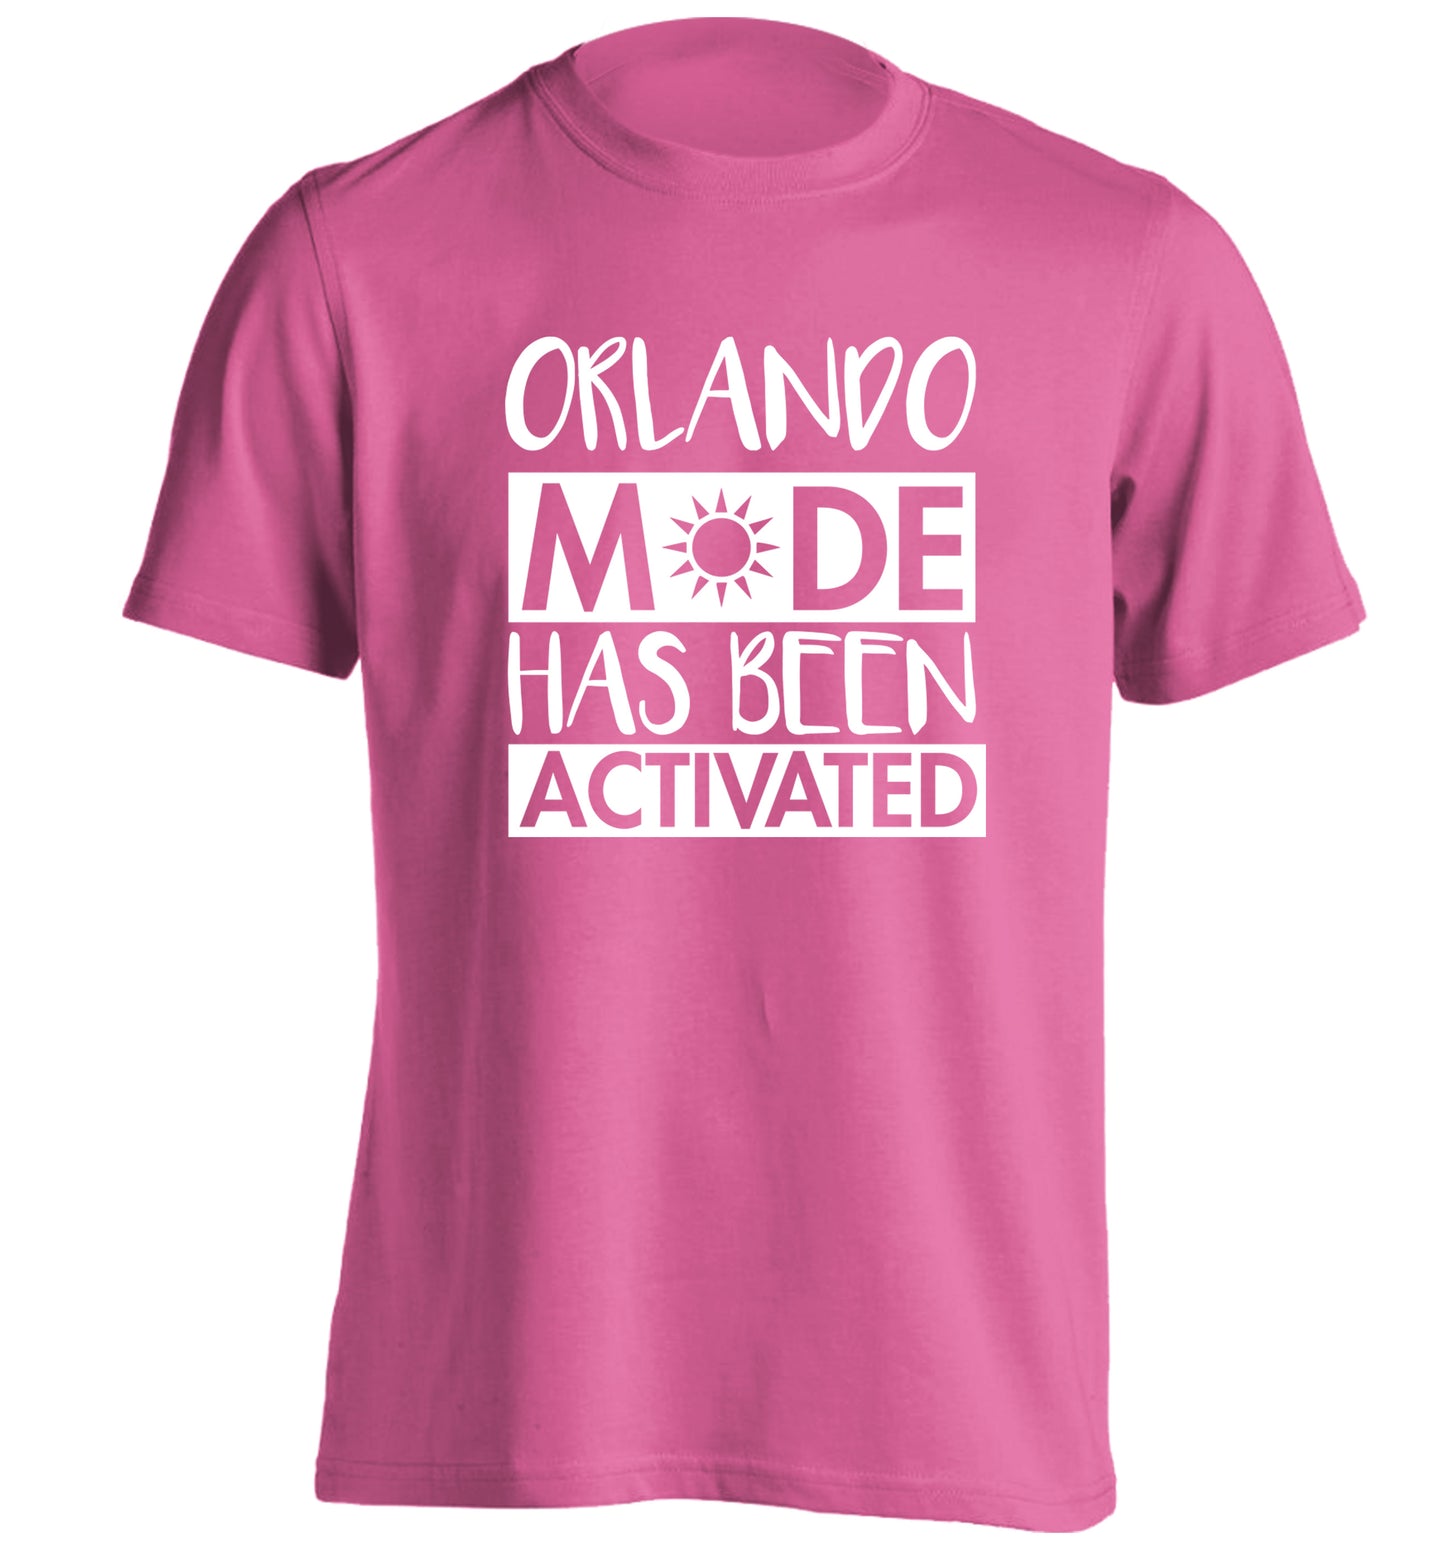 Orlando mode has been activated adults unisex pink Tshirt 2XL